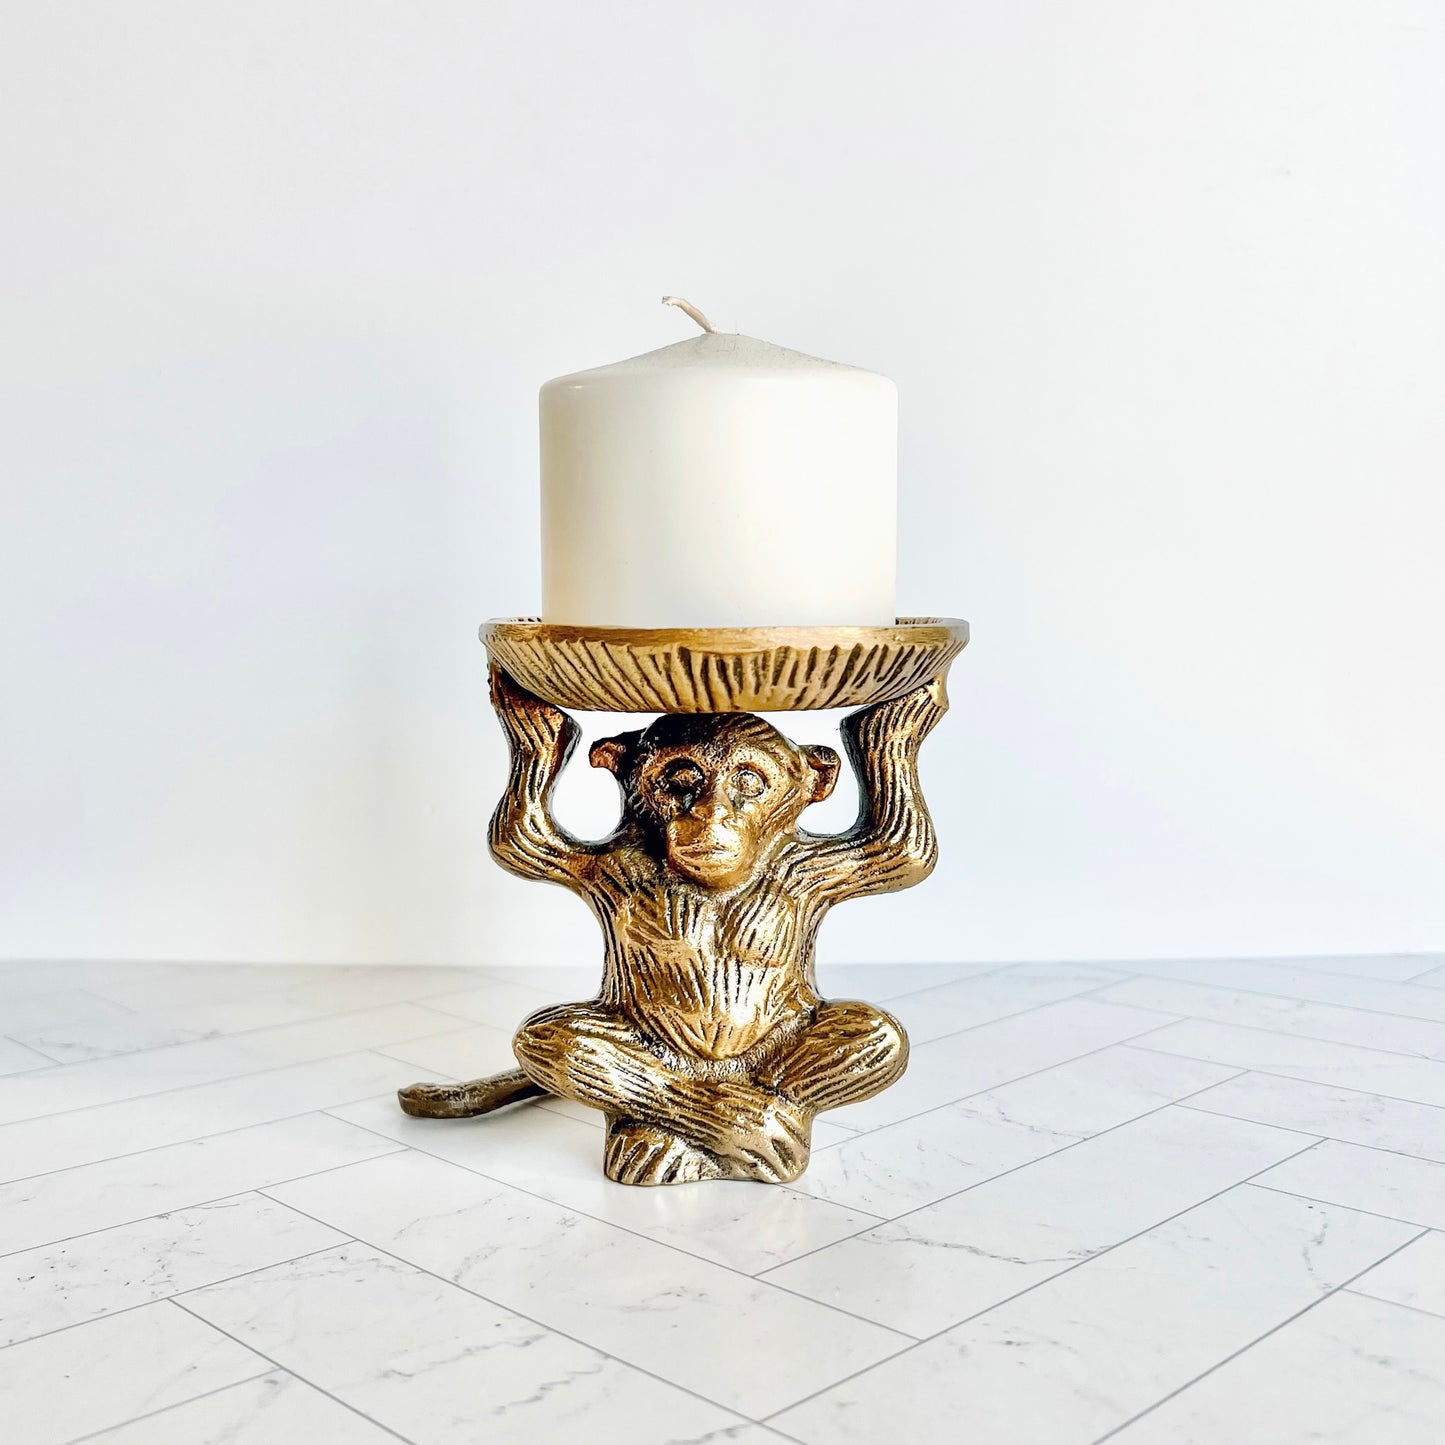 The brass animal figurine shown holding a pillar candle